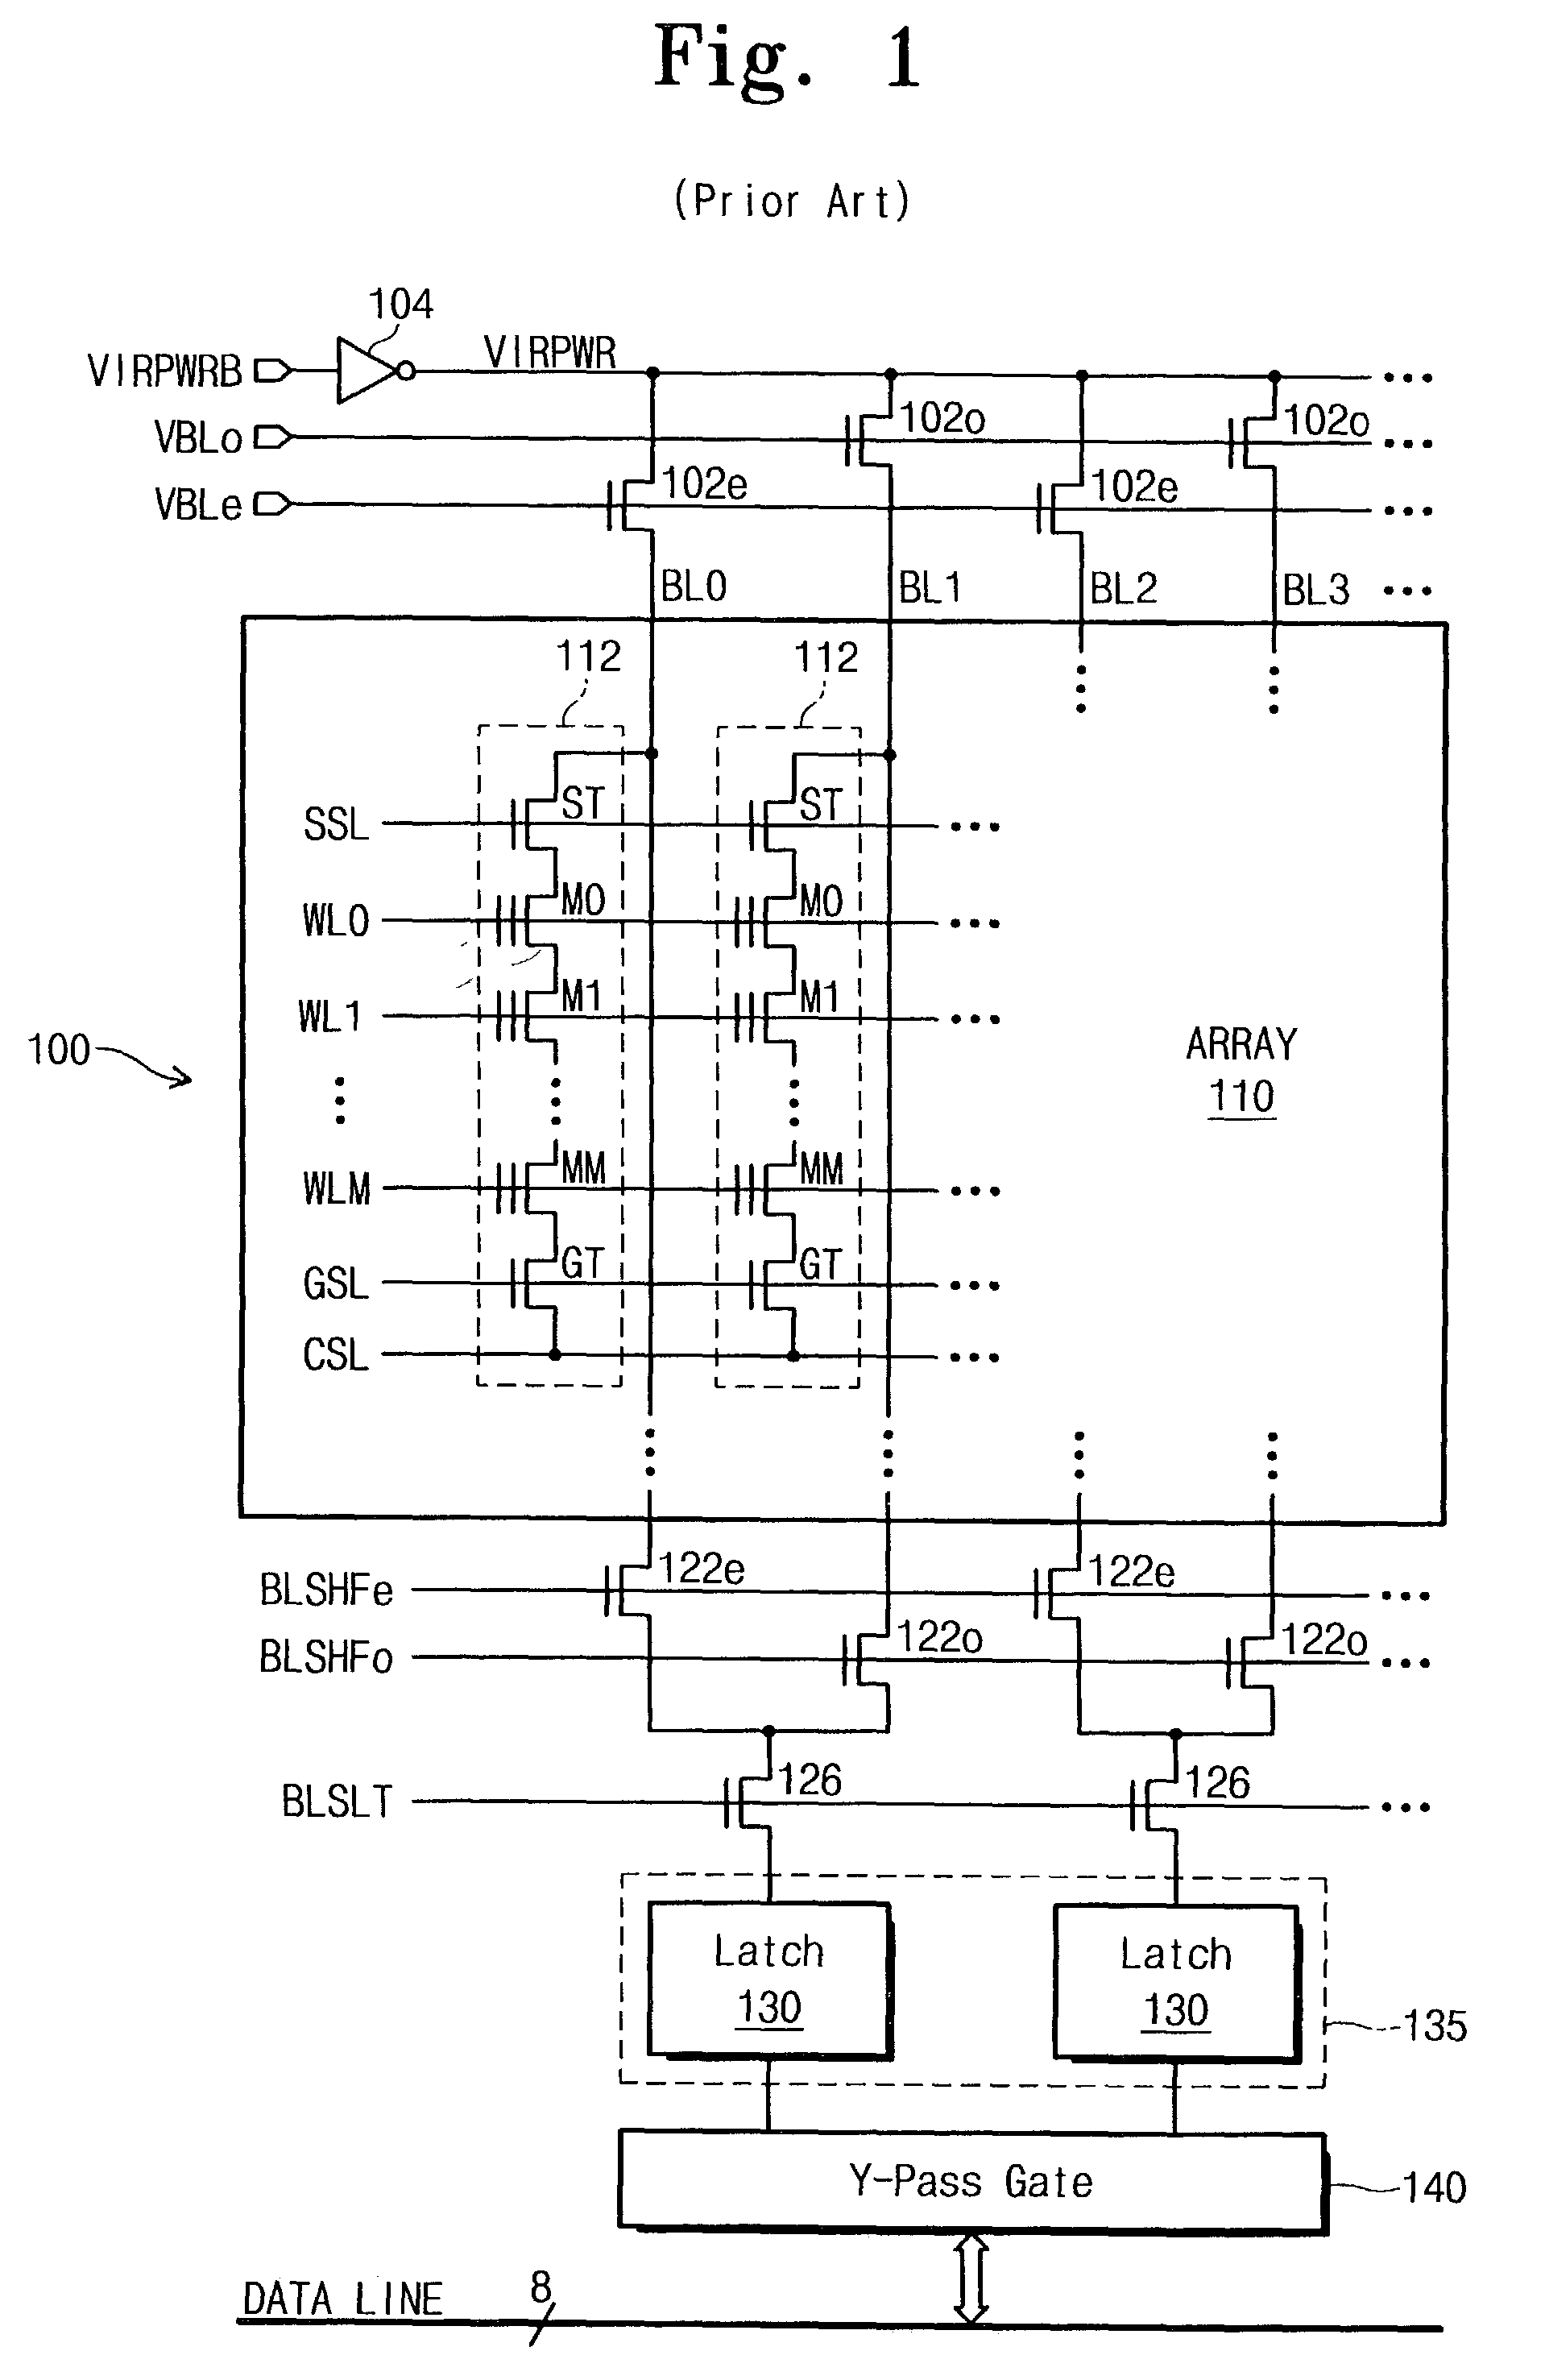 Bit line setup and discharge circuit for programming non-volatile memory